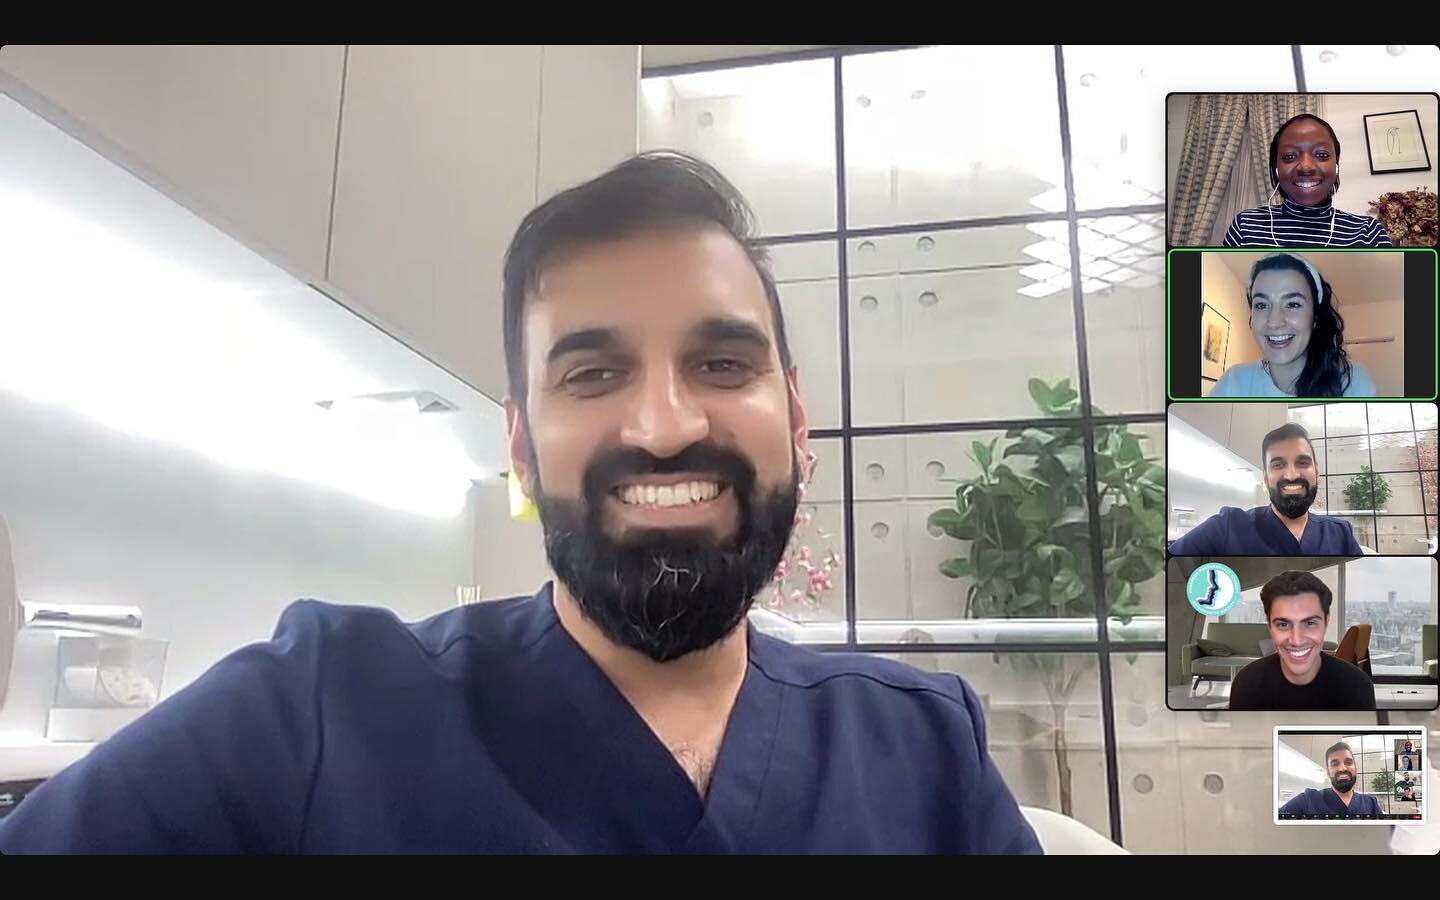 What a successful Winter Webinar! We were thrilled to have so many postgraduates in attendance from all over the globe!

A special thanks to Dr Farooq Ahmed for providing a brilliant lecture on IPR and congratulations to our case competition winner, 